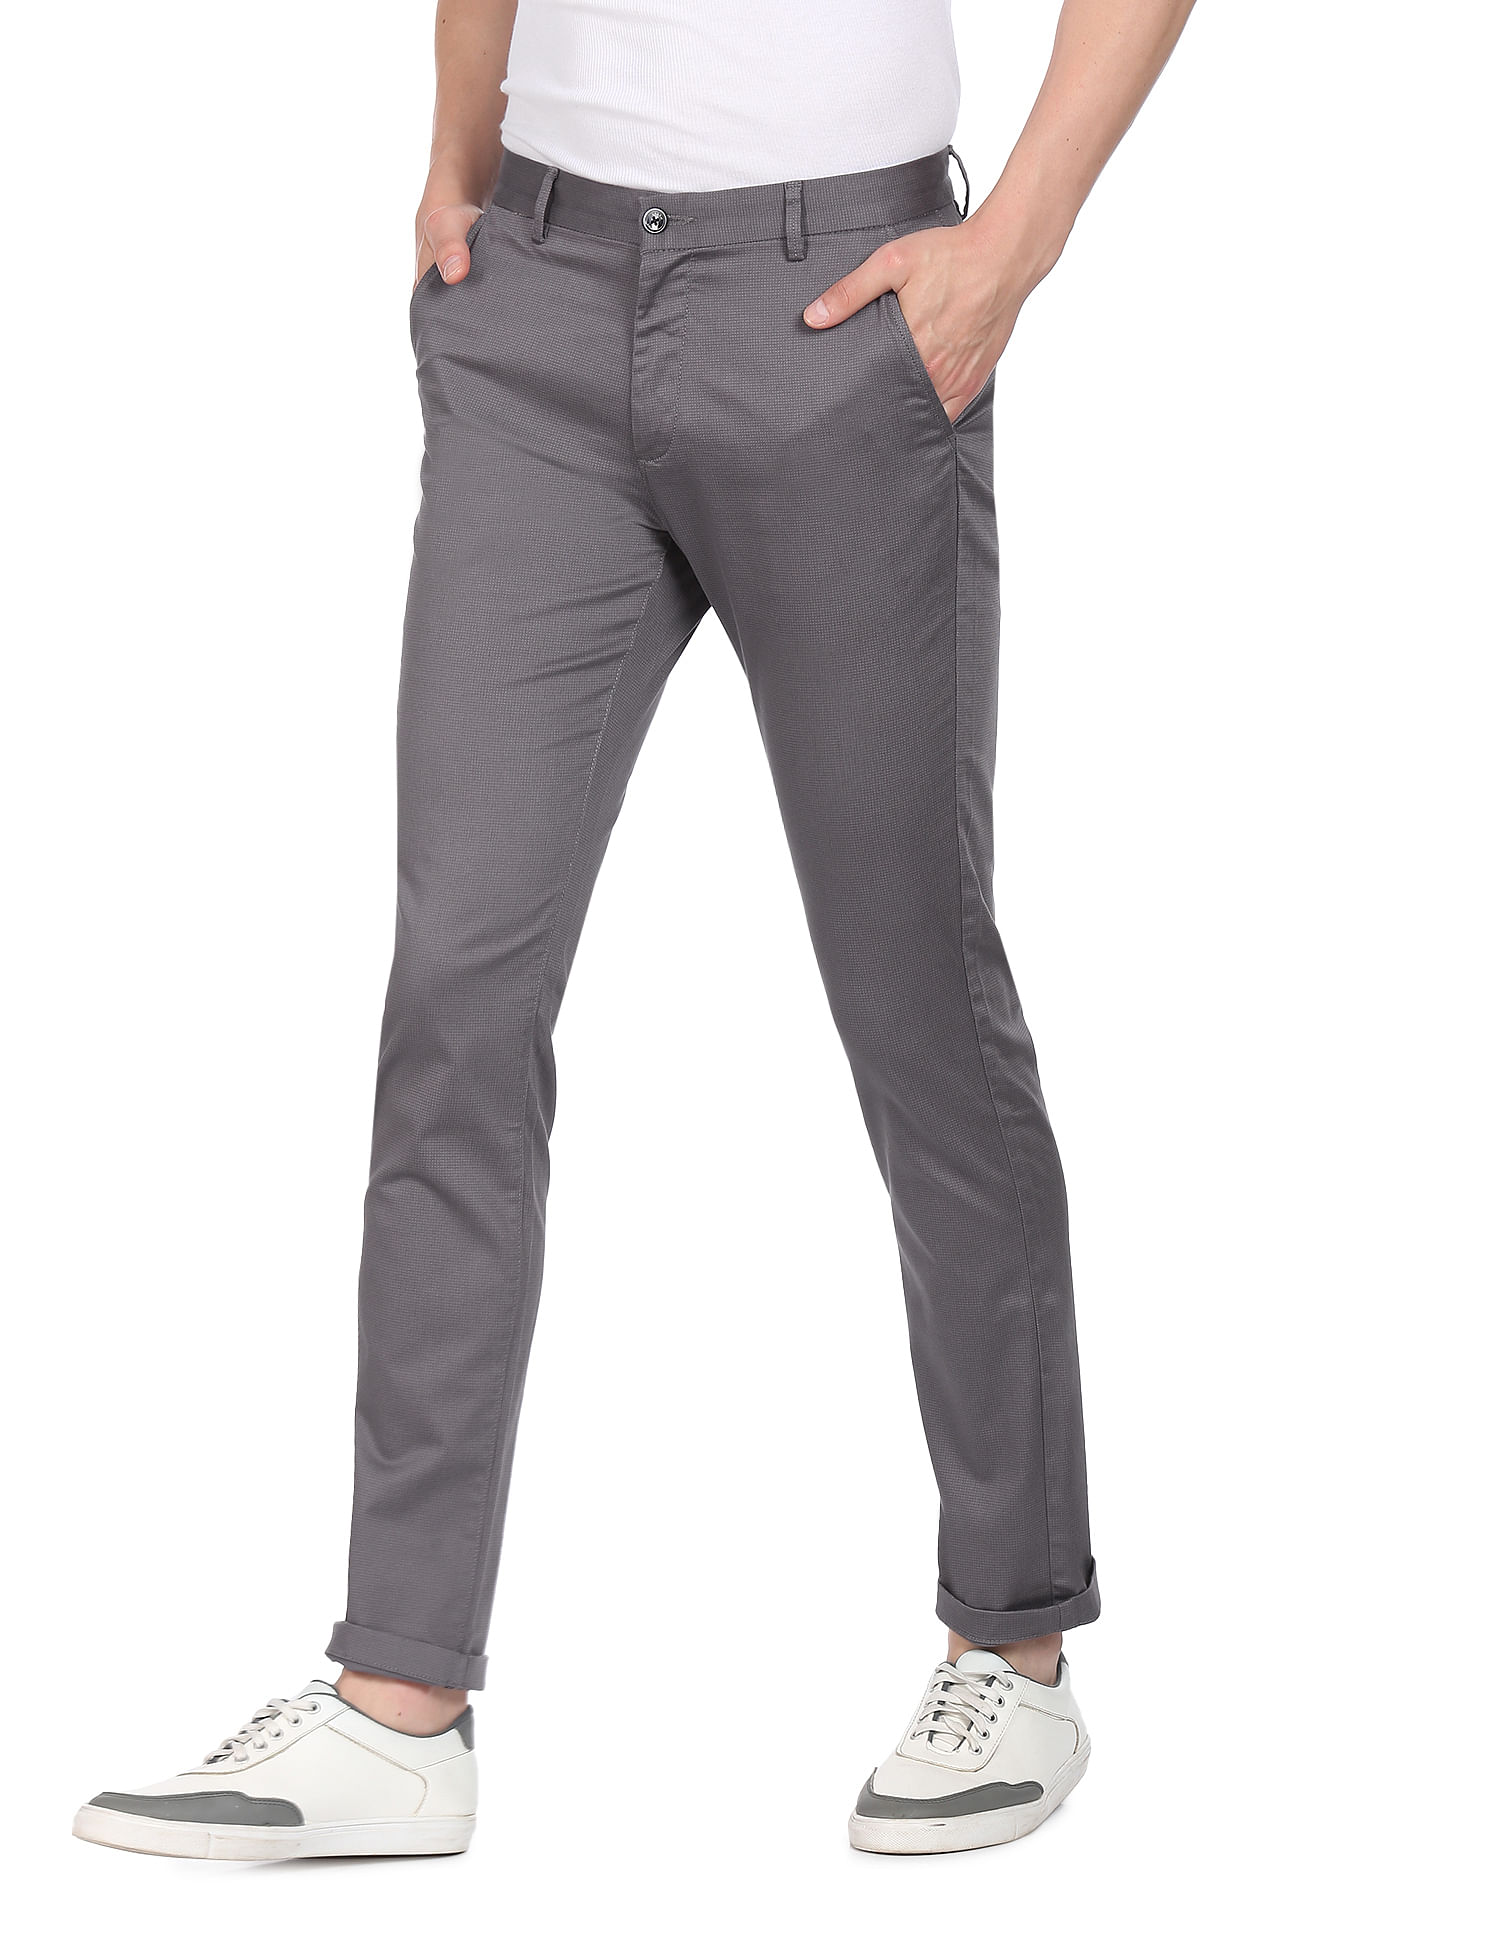 low-rise trousers for young guys